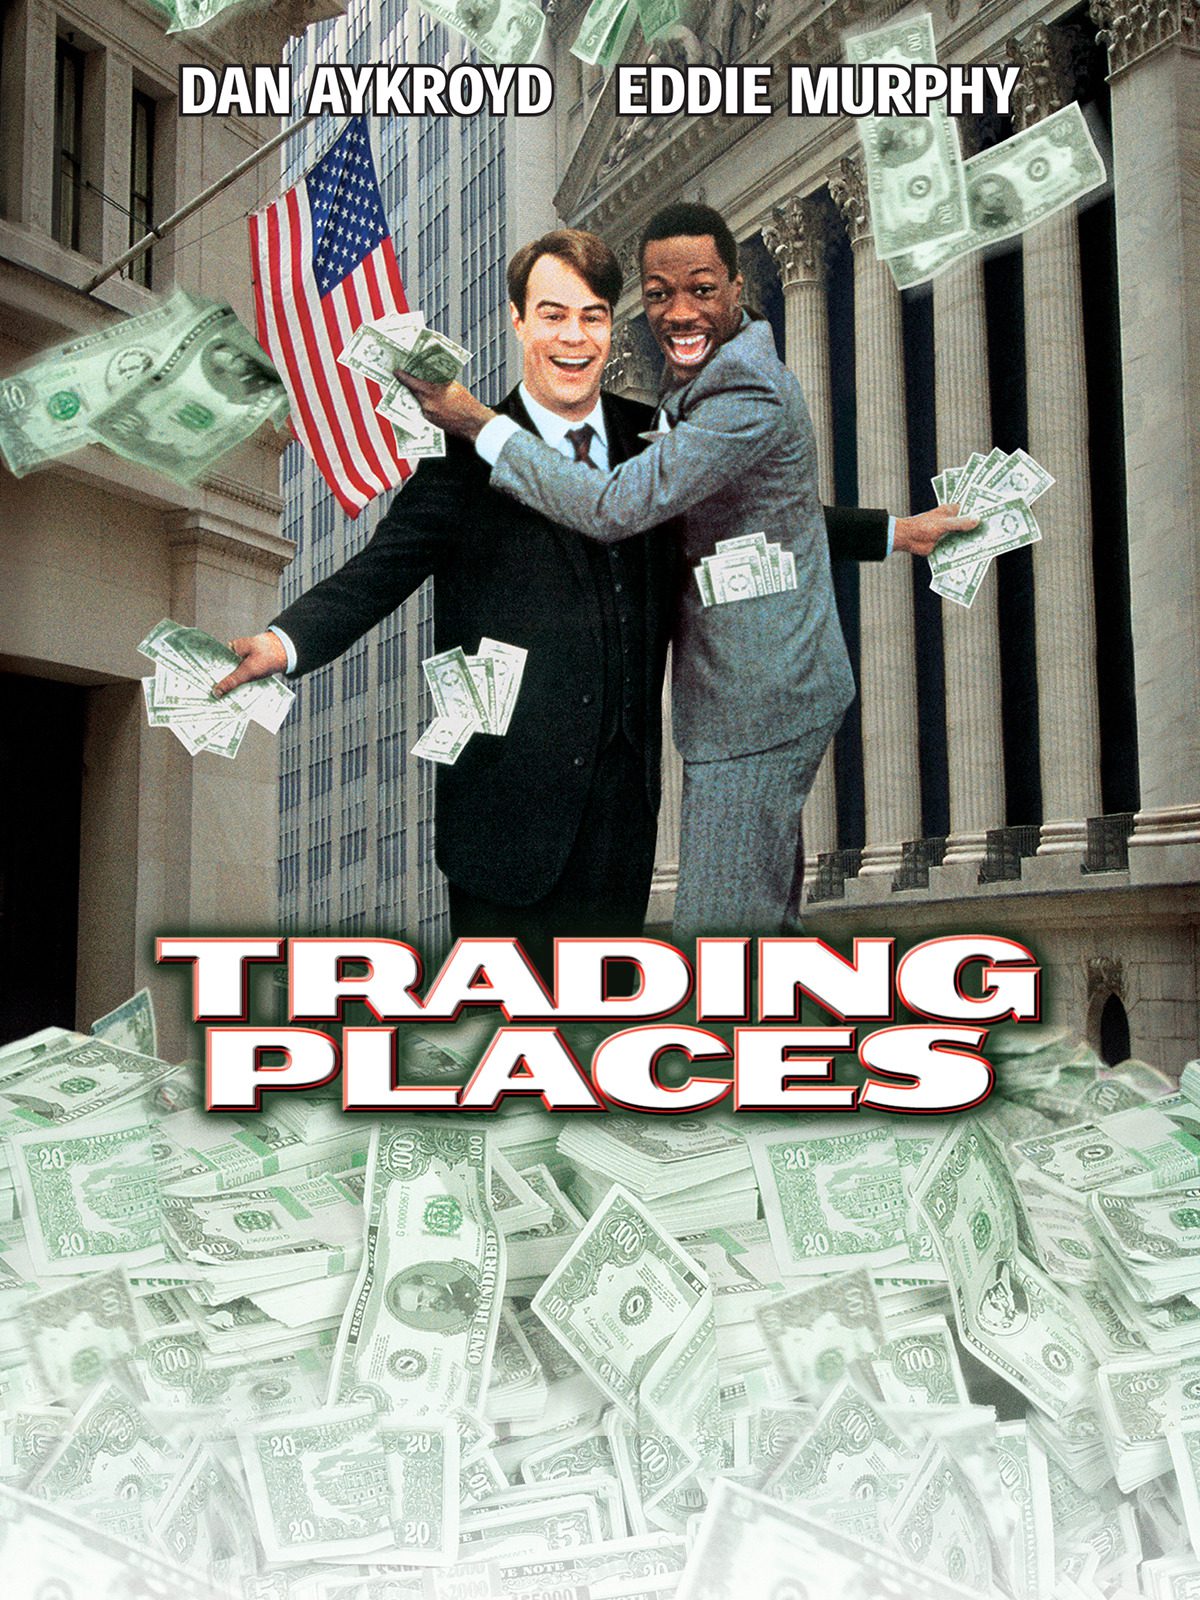 Trading Places (1983), a rib-tickling comedy